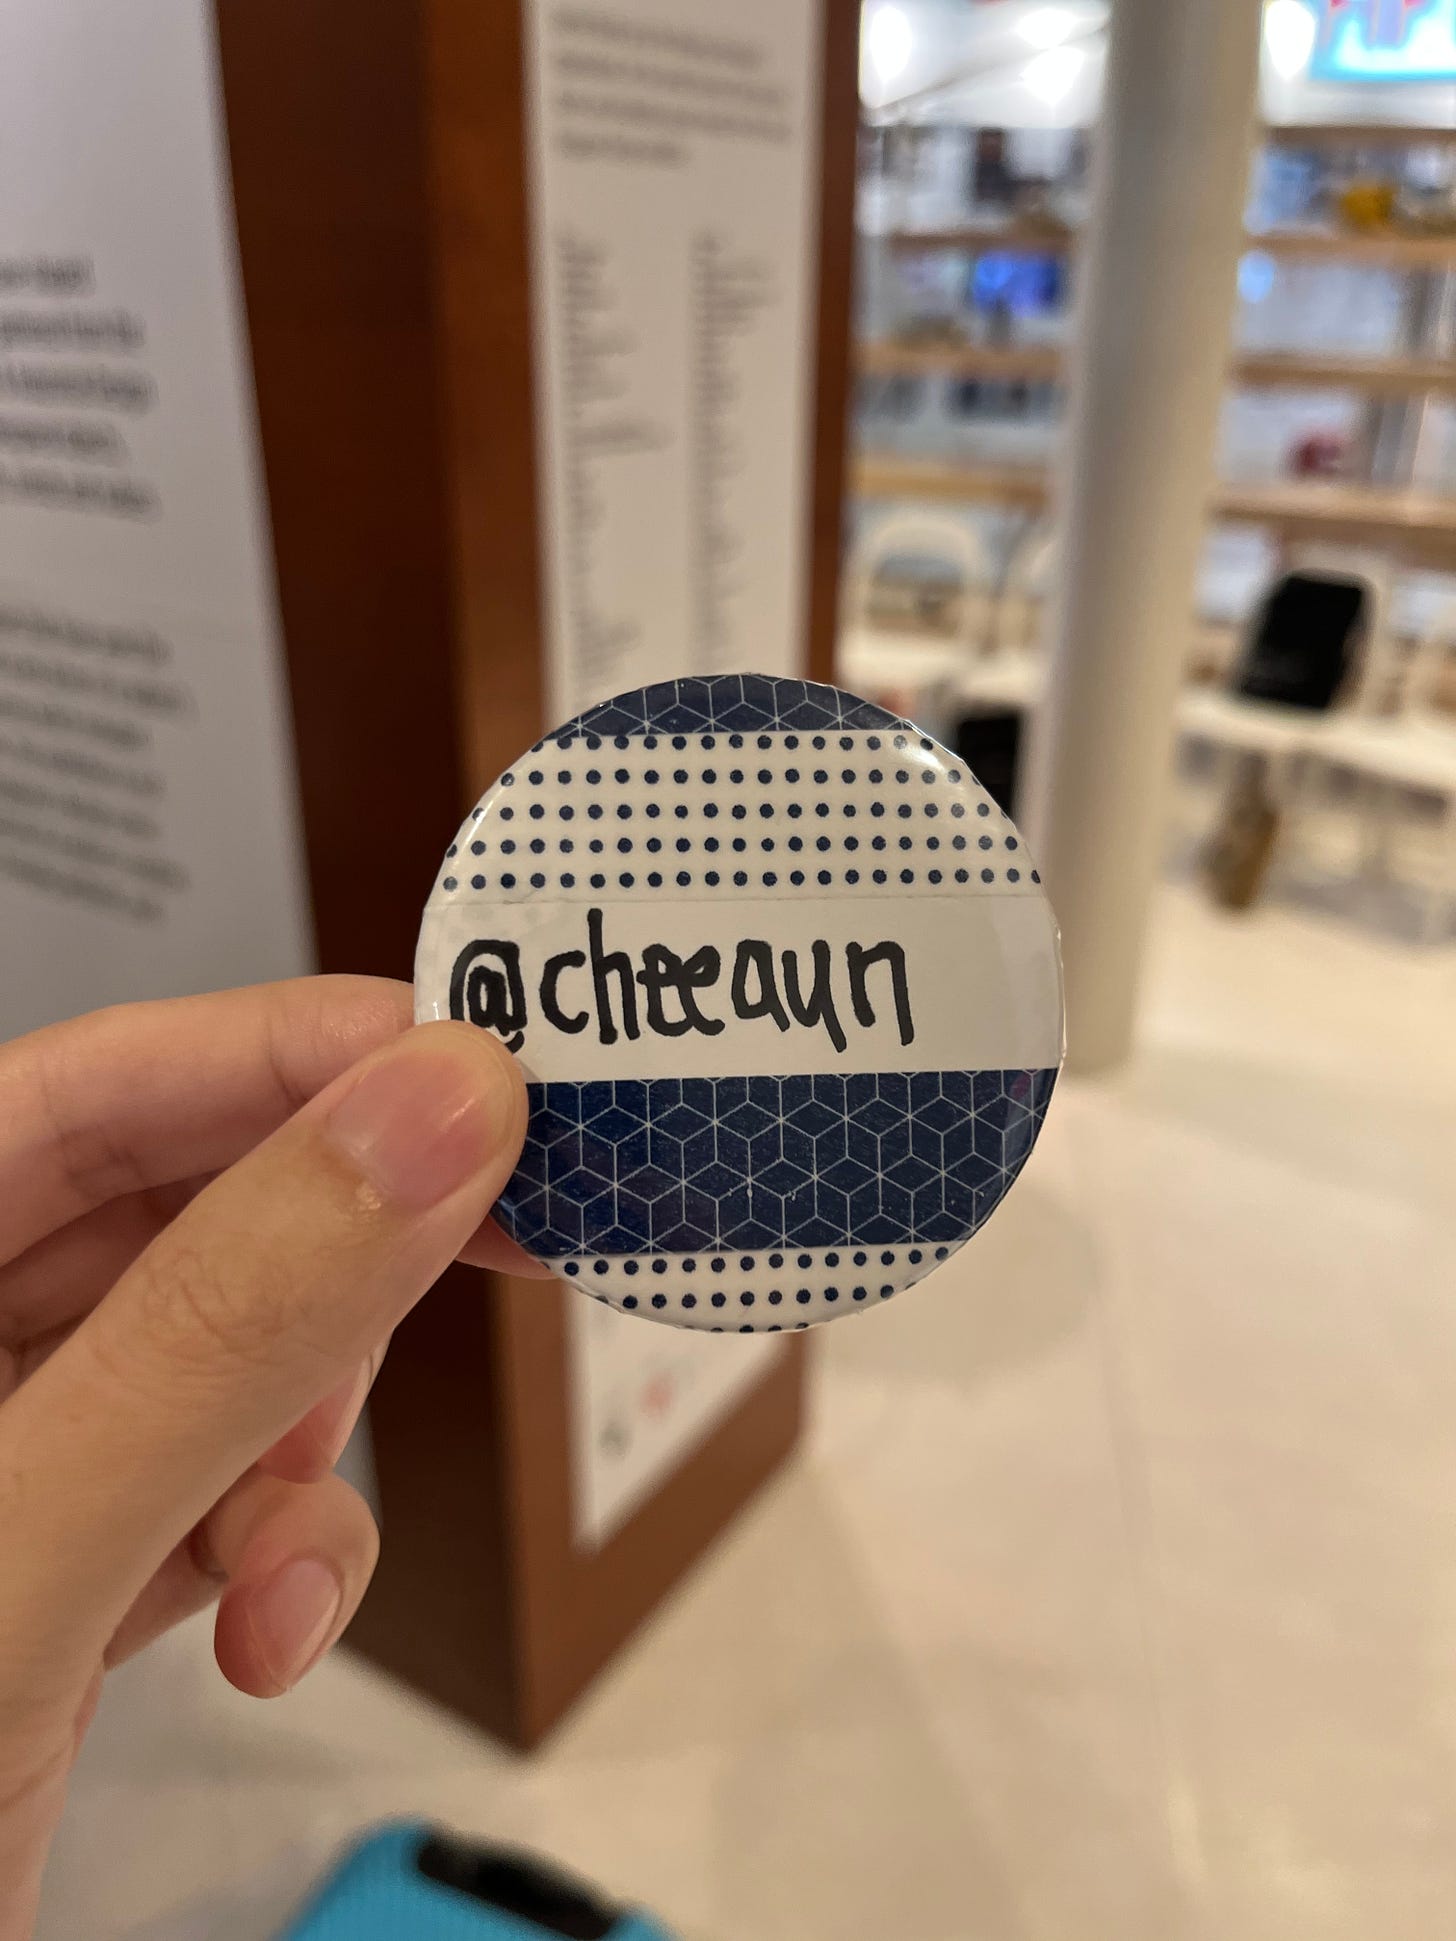 A pin with my "cheeaun" username on it